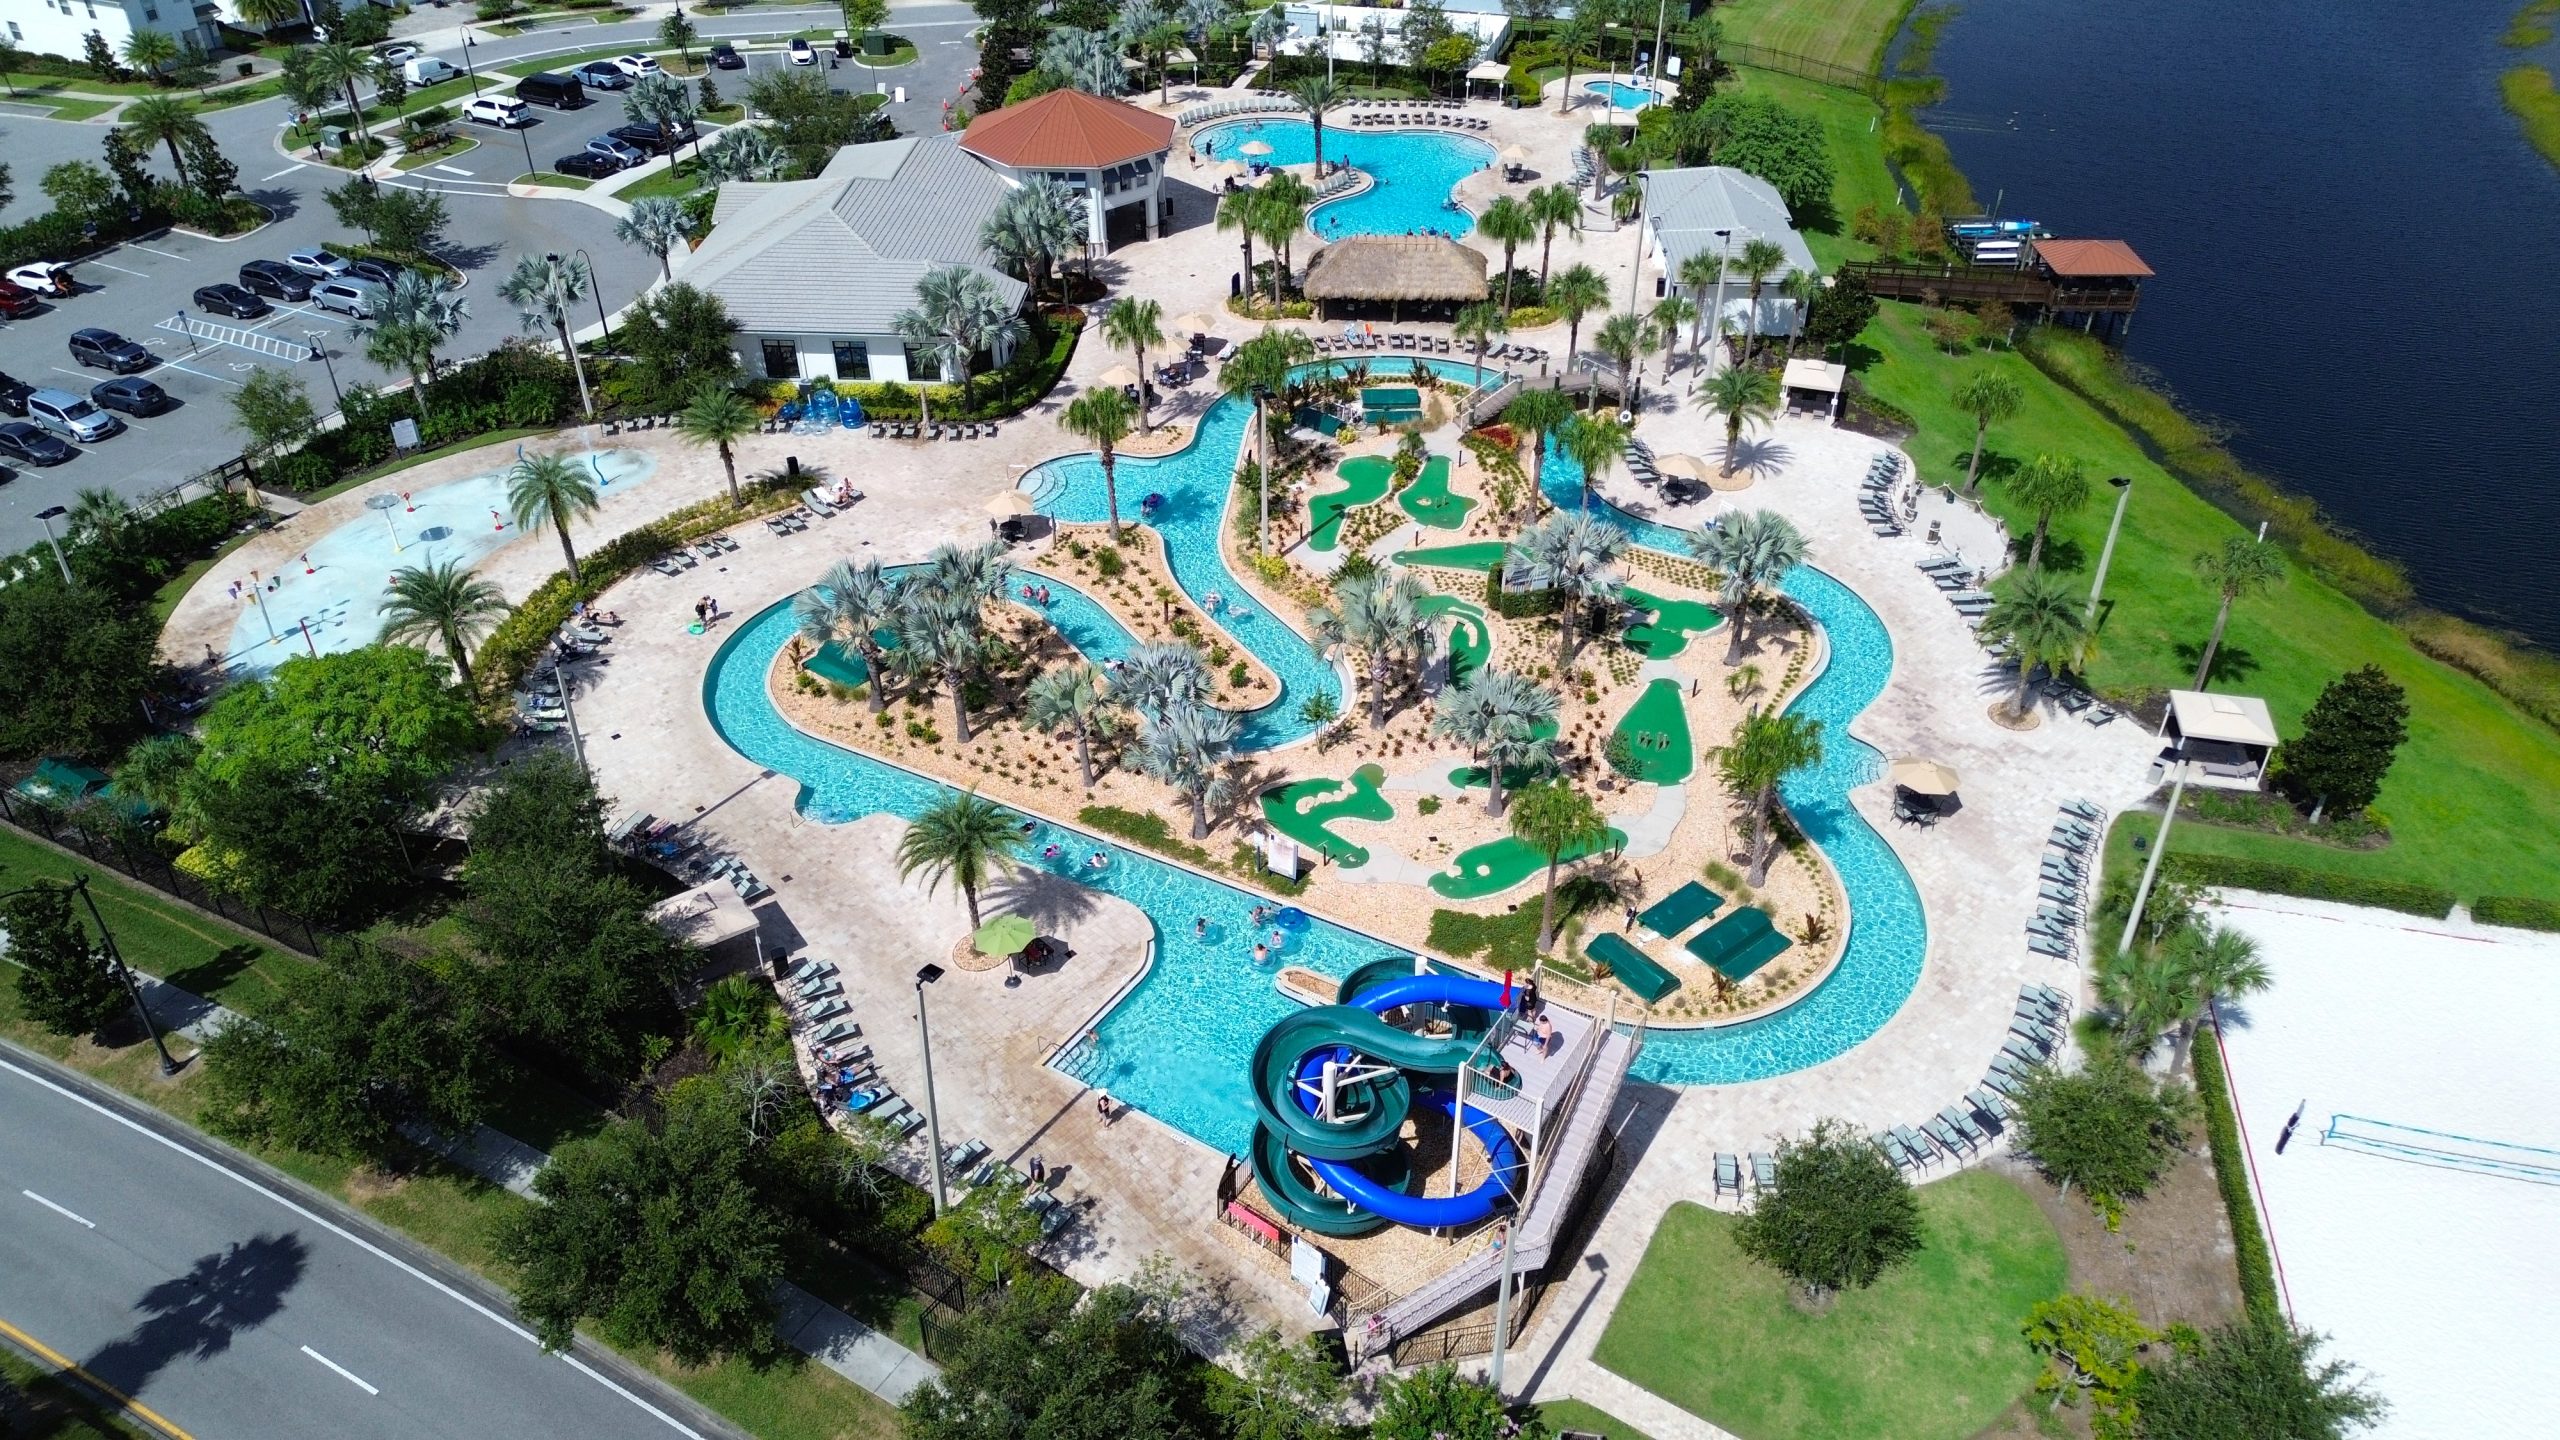 Waterslides and Lazy River